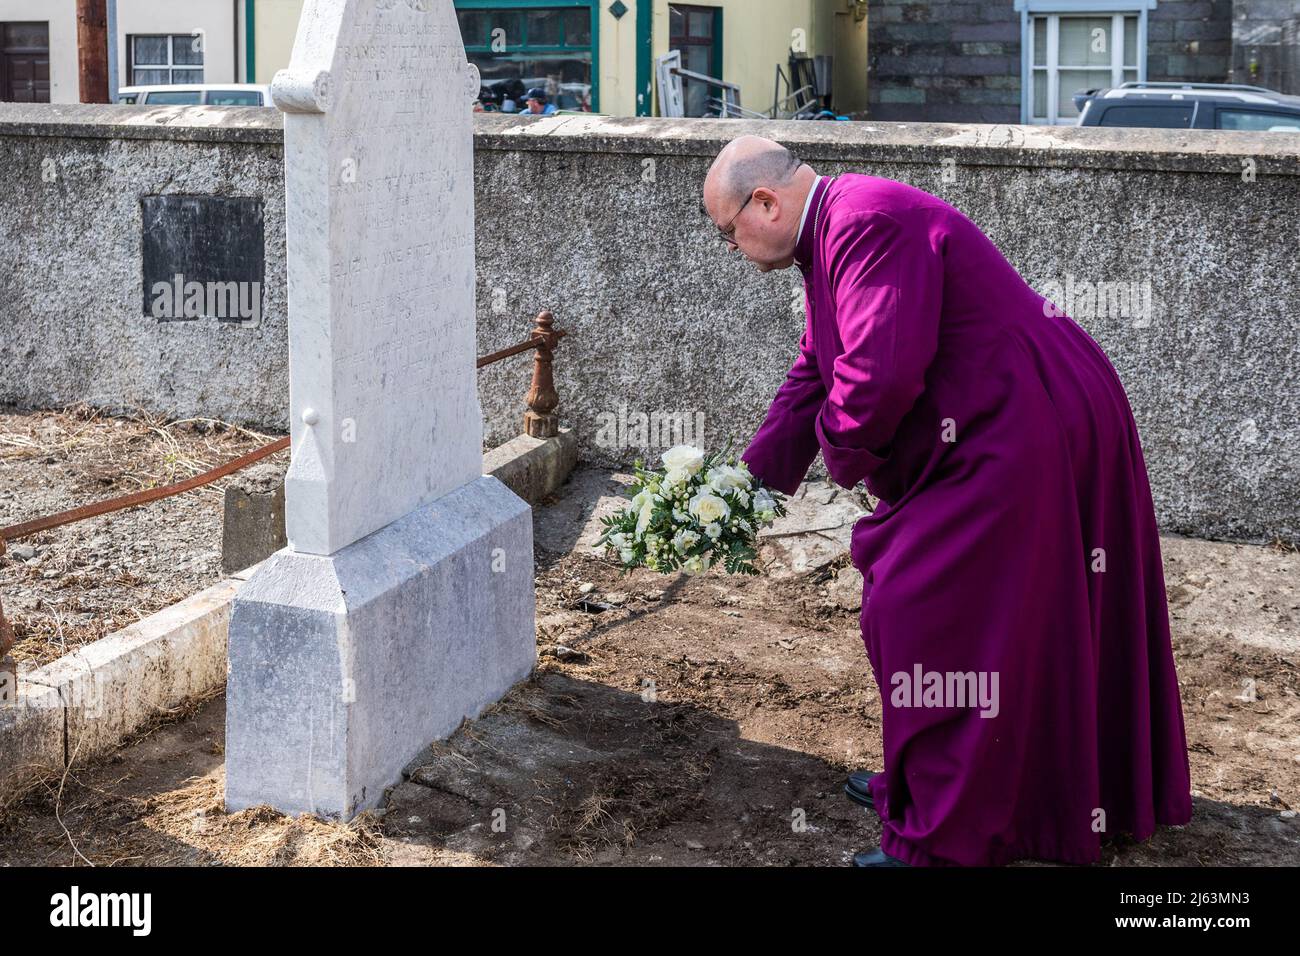 Dunmanway, West Cork, Ireland. 27th Apr, 2022. Today is the 100th Anniversary of the Bandon Valley killings, where 3 men from Dunmanway were shot dead. Bishop of Cork, Cloyne and Ross, Dr. Paul Colton, lays a wreath on the grave of 72 year old victim Francis Fitzmaurice. Credit: AG News/Alamy Live News Stock Photo